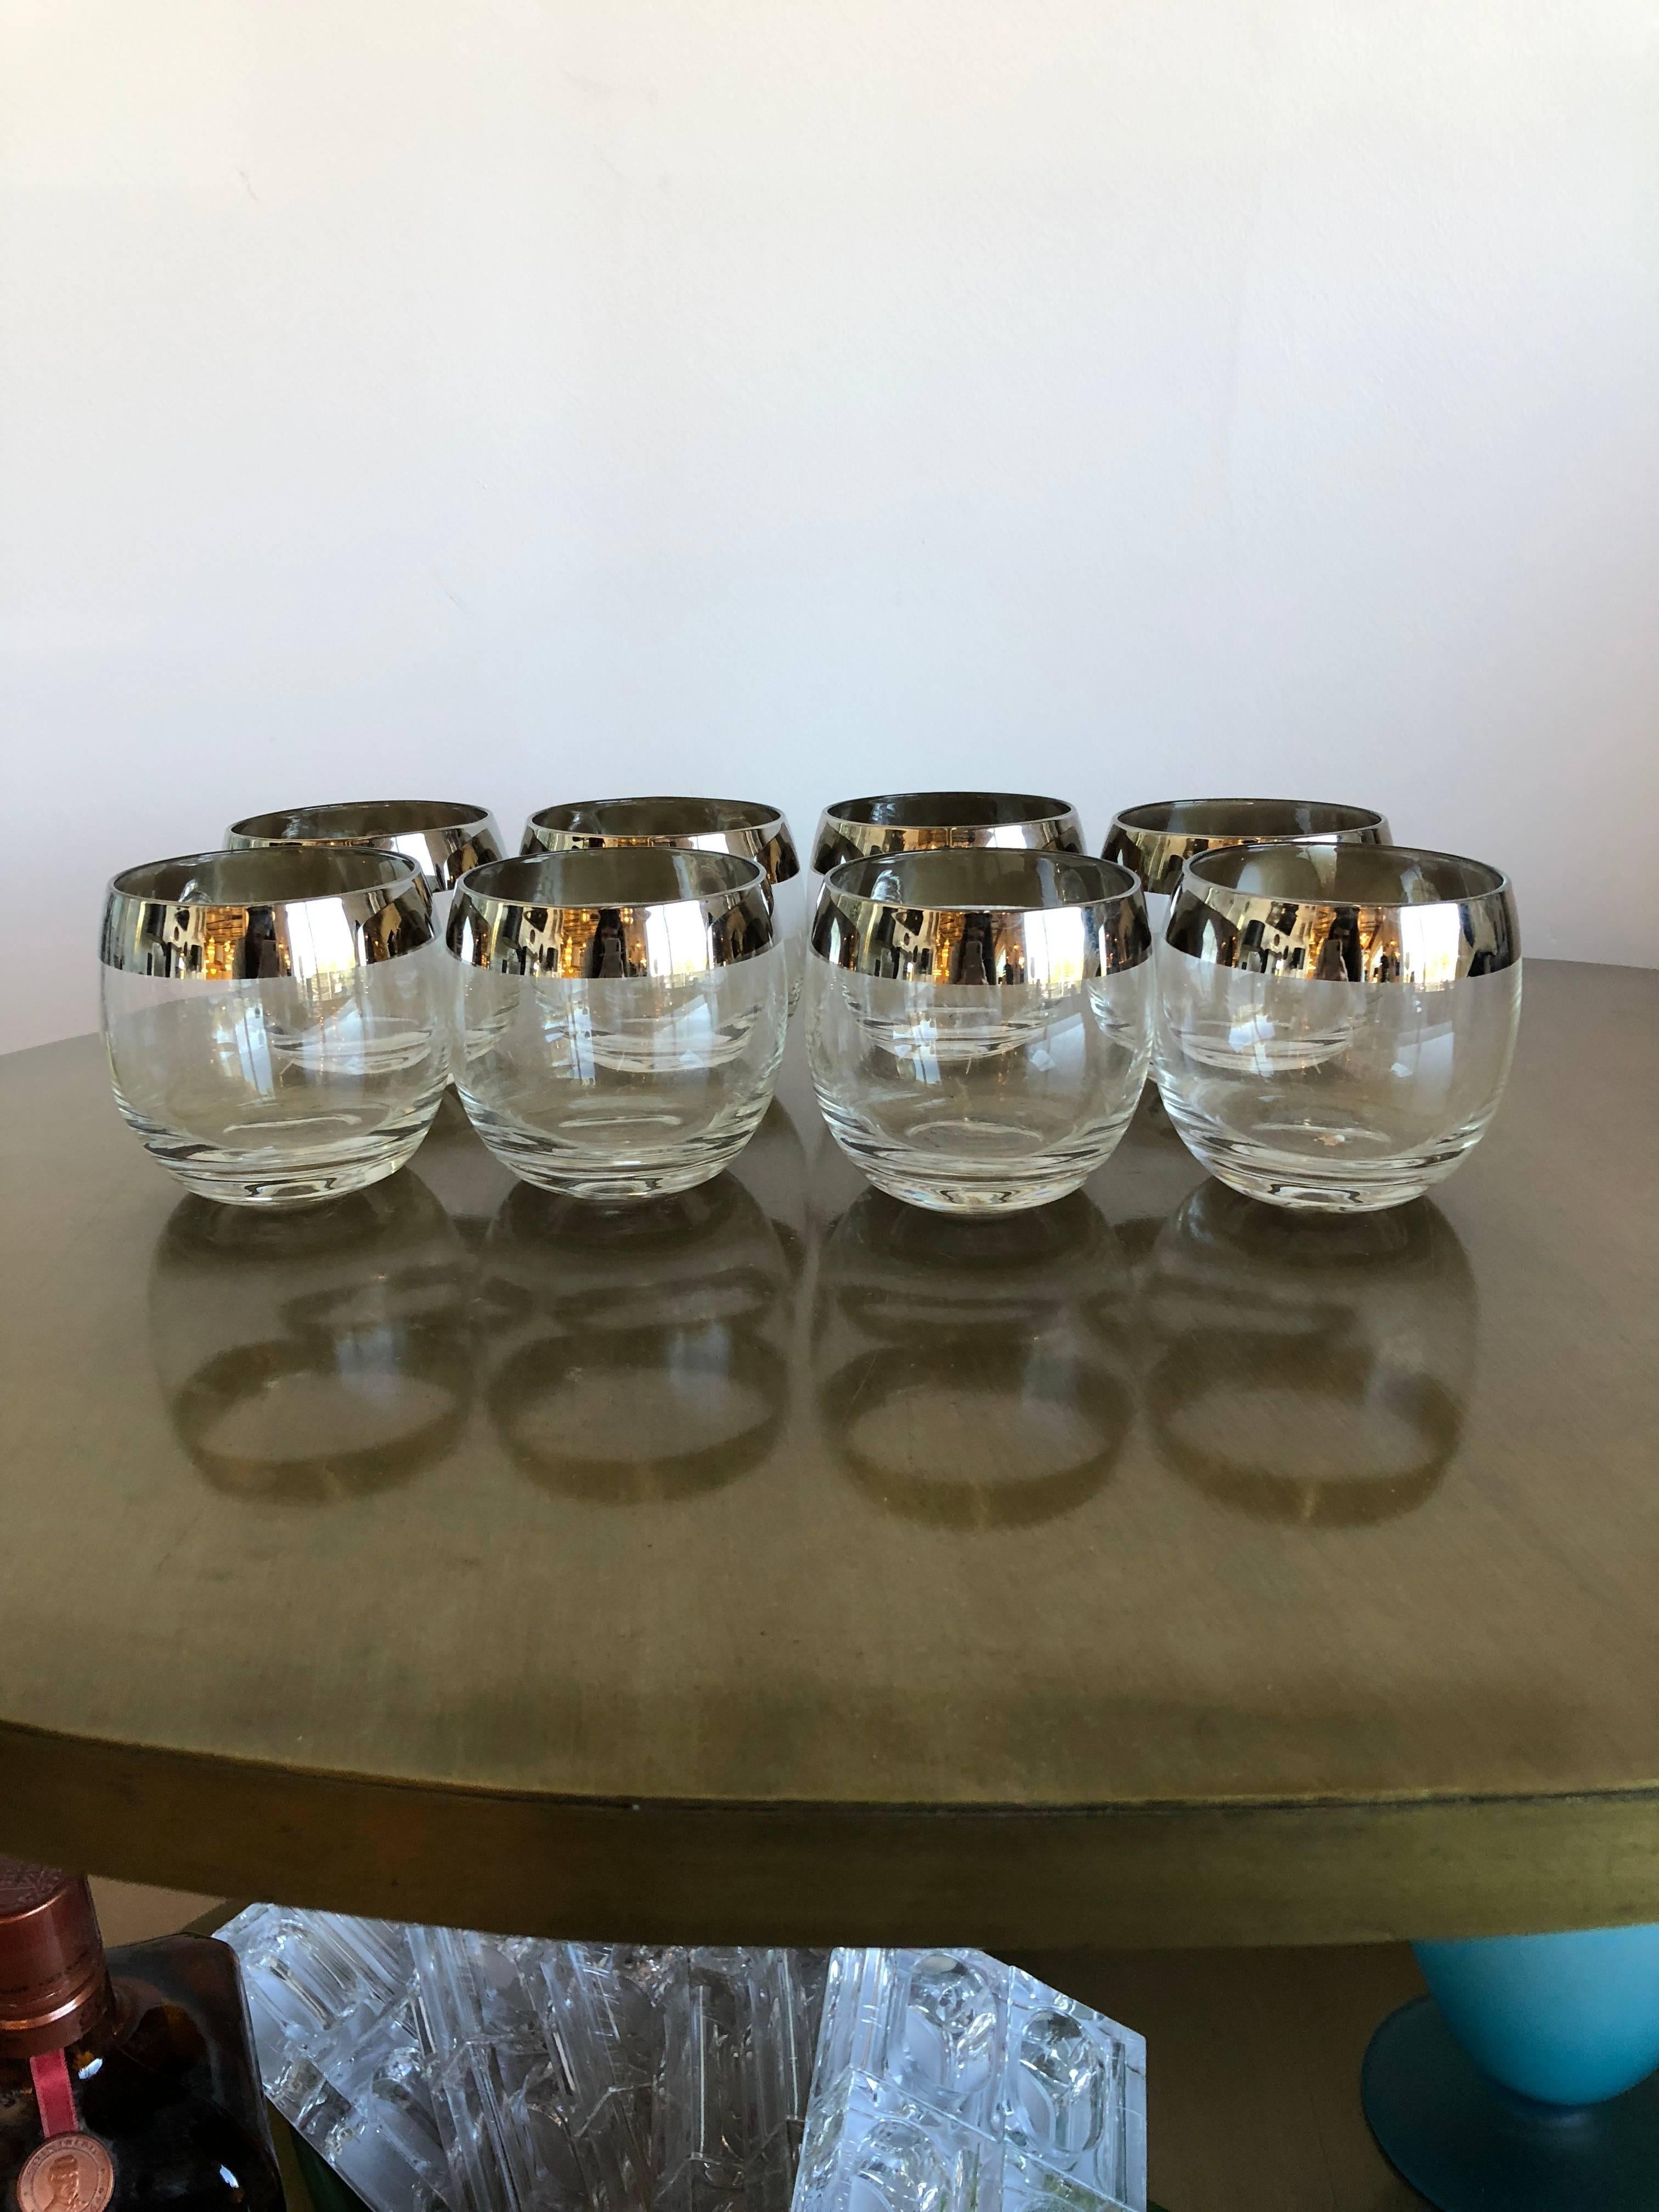 Offered is a set of eight Mid-Century Modern Dorothy Thorpe silver overlay 